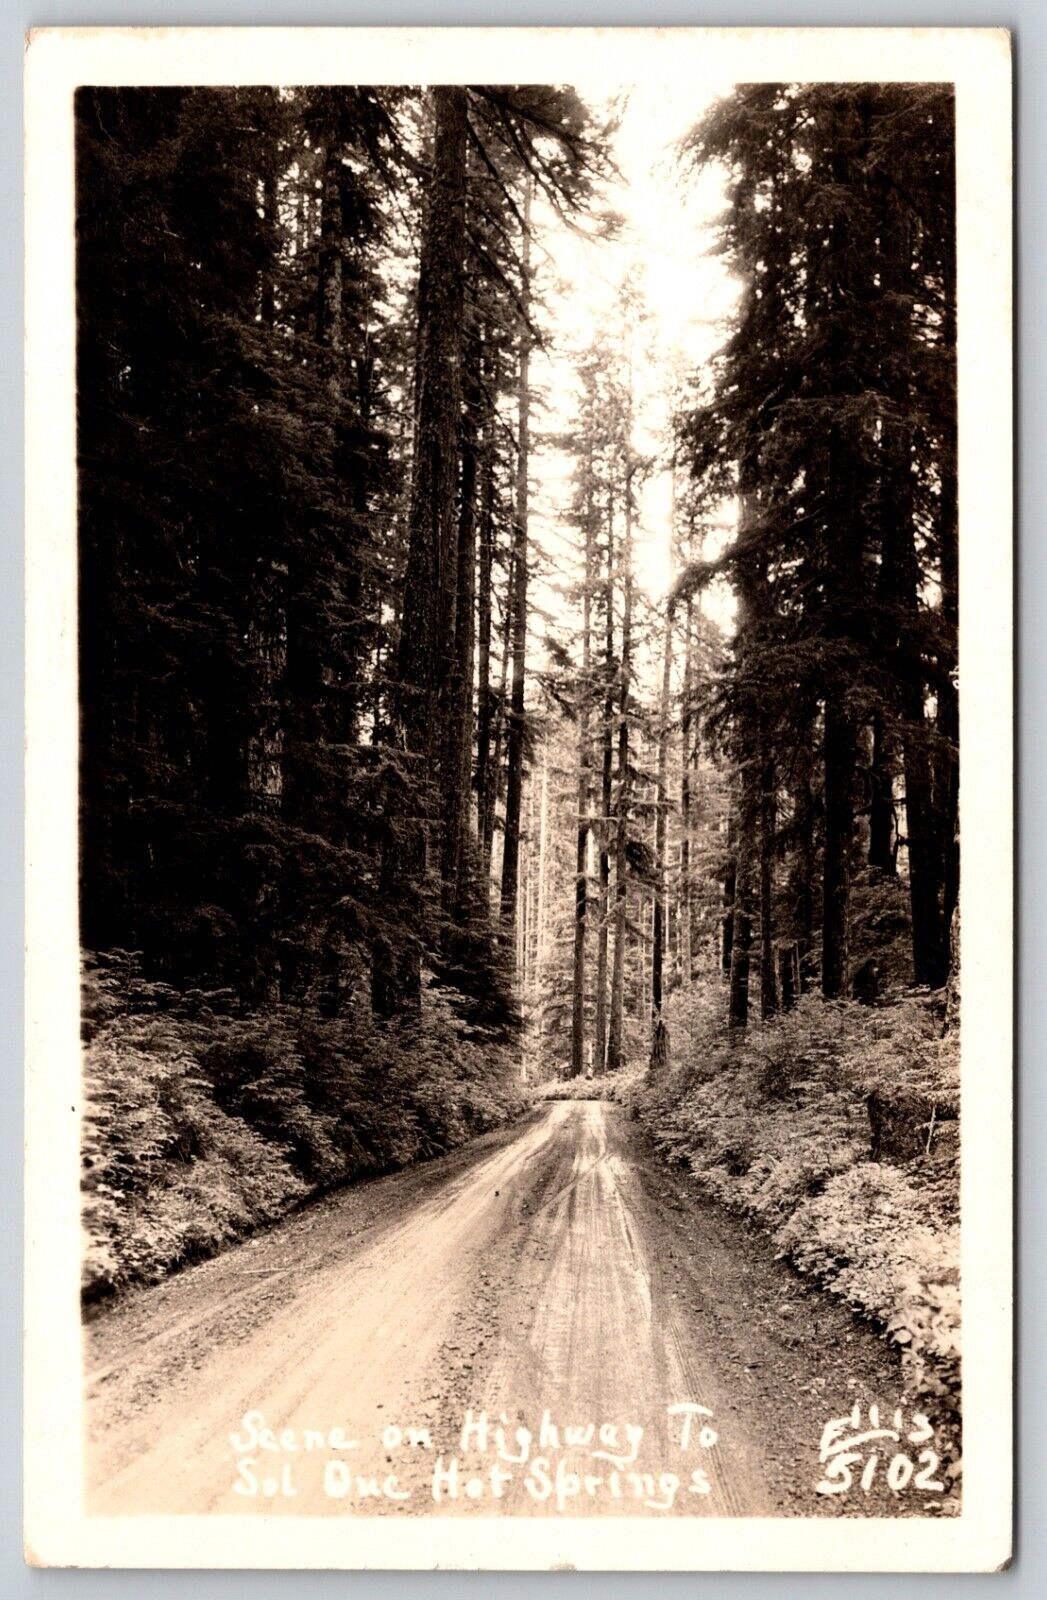 RPPC - Highway to Sol Duc Hot Springs Olympic Peninsula WA - Real Photo Postcard